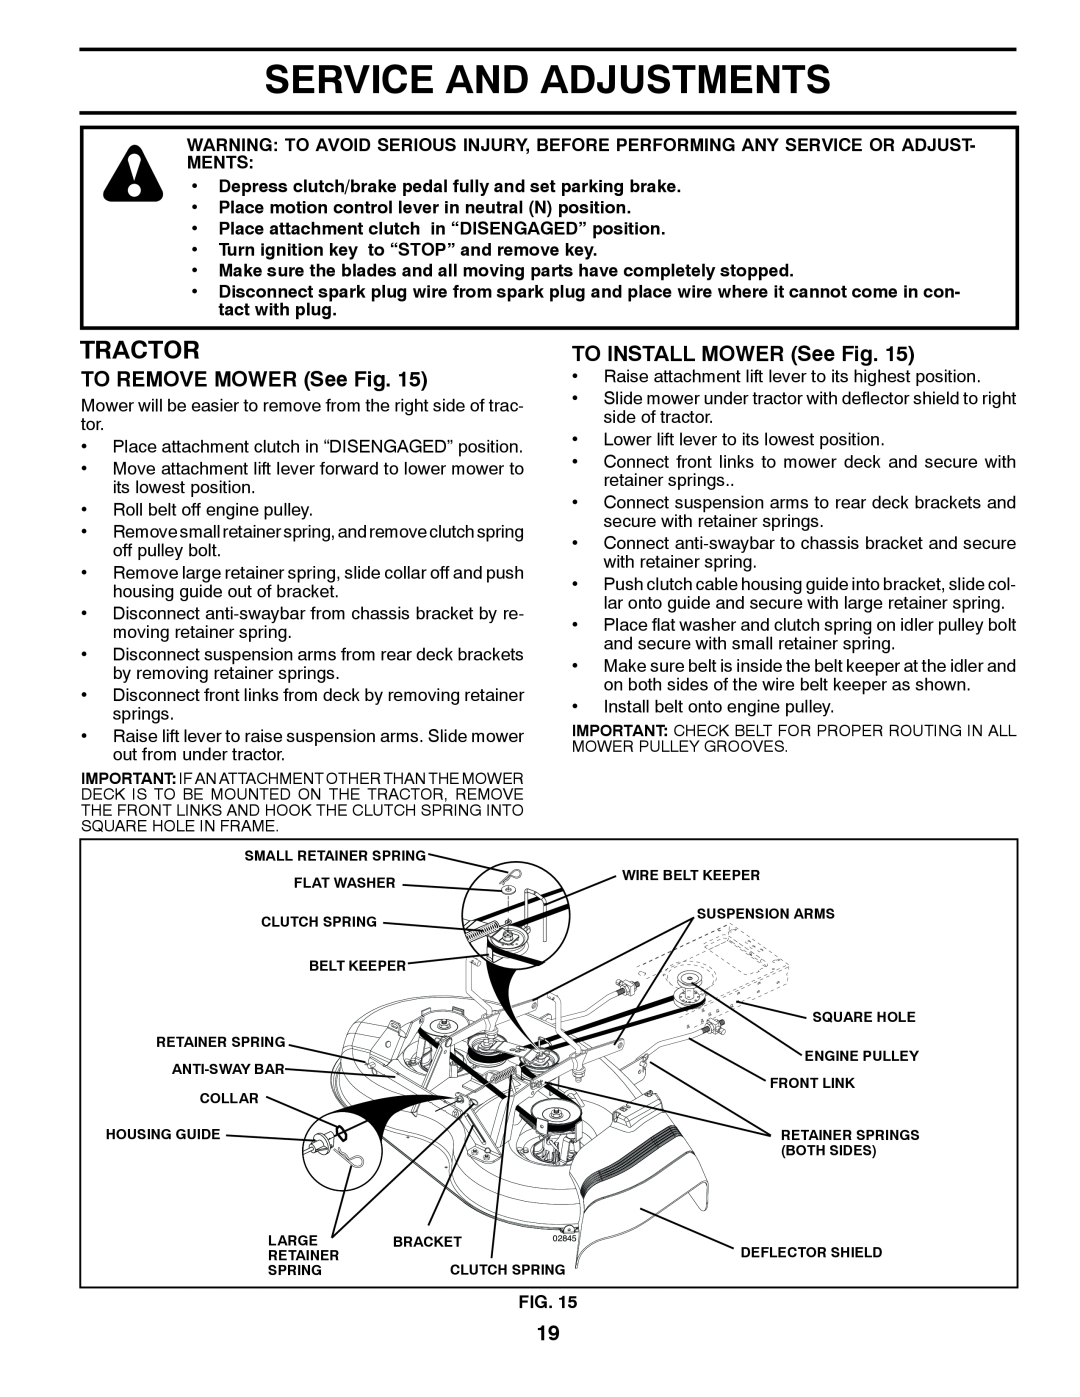 Husqvarna LTH1797 owner manual Service And Adjustments, TO REMOVE MOWER See Fig, TO INSTALL MOWER See Fig, Tractor 